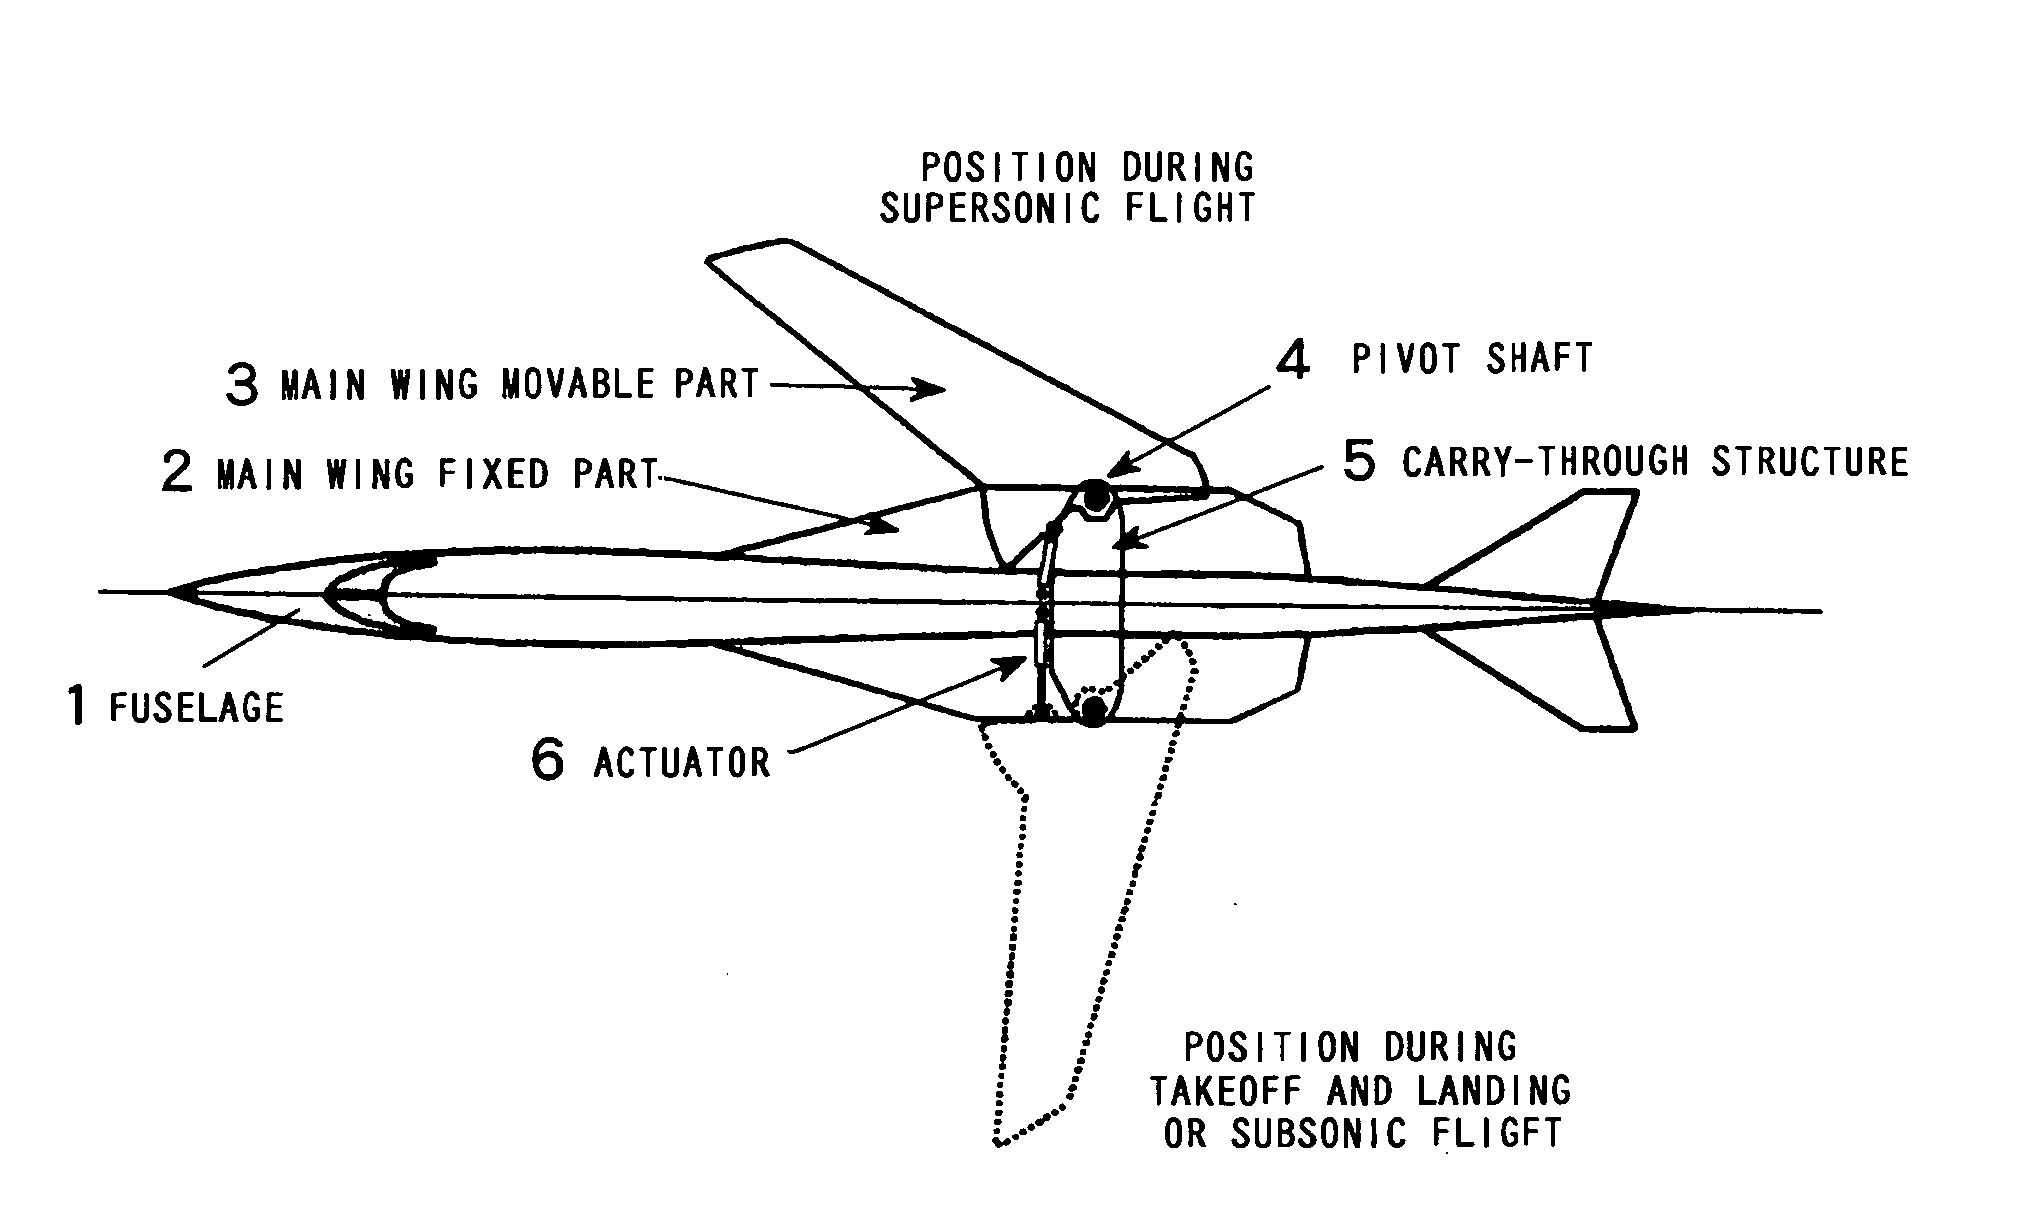 Variable forward swept wing supersonic aircraft having both low-boom characteristics and low-drag characteristics